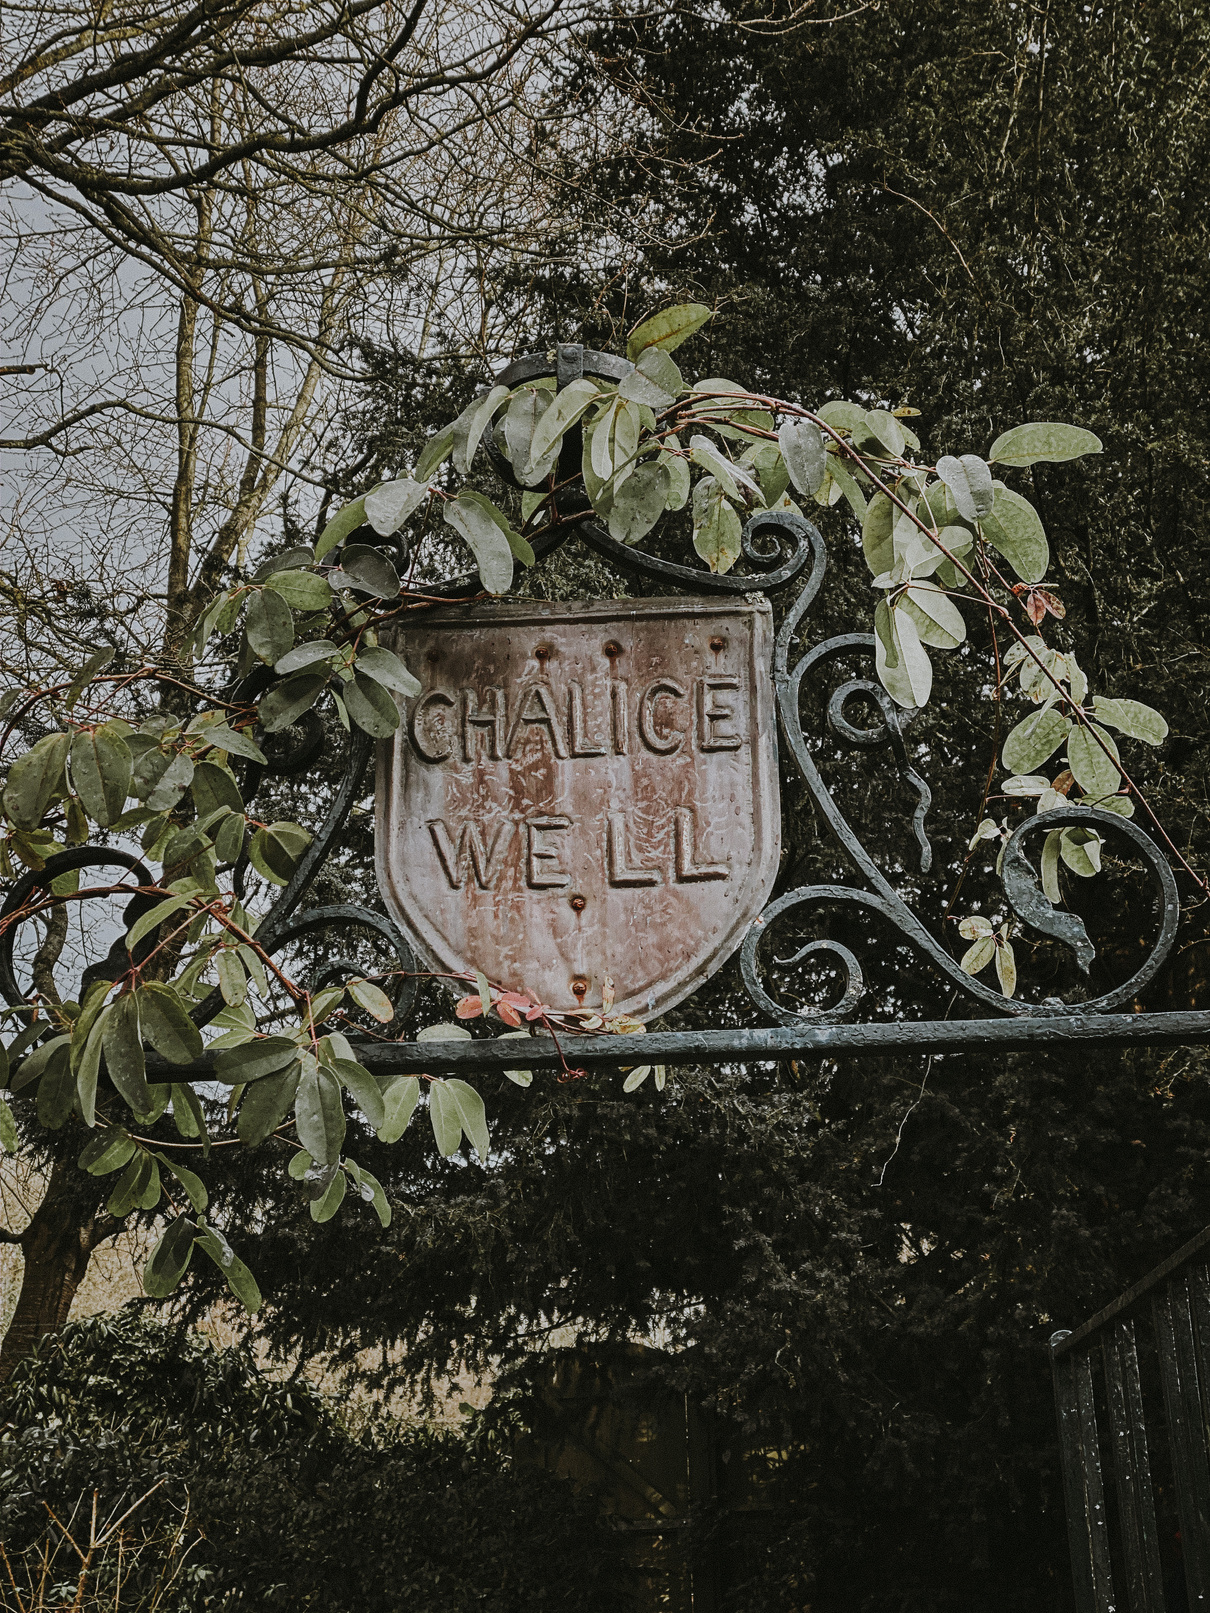 The Chalice Well Gardens